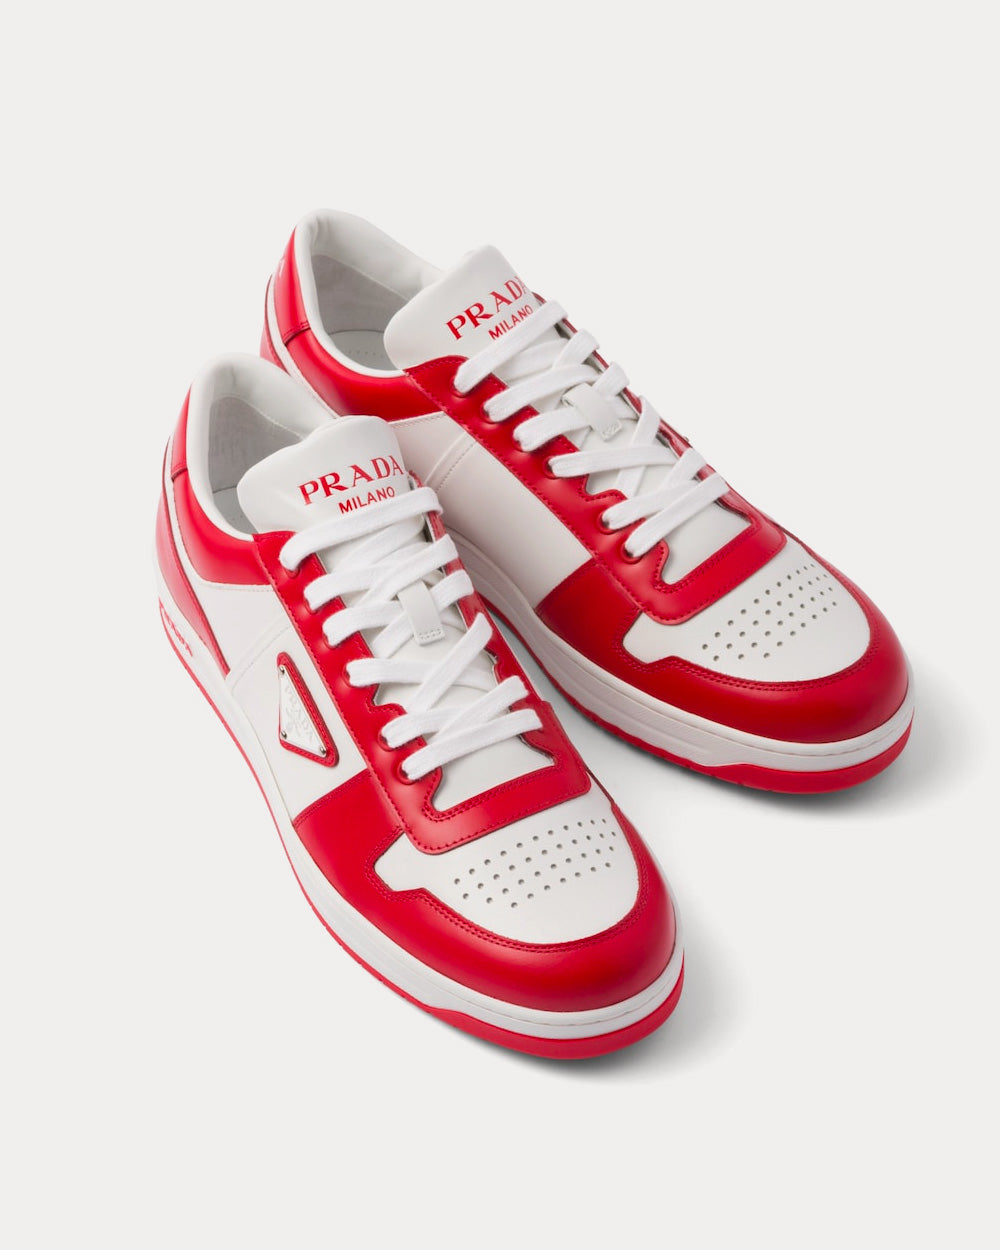 Prada Leather White / Lacquer Red Low Top Sneakers - Sneak in Peace